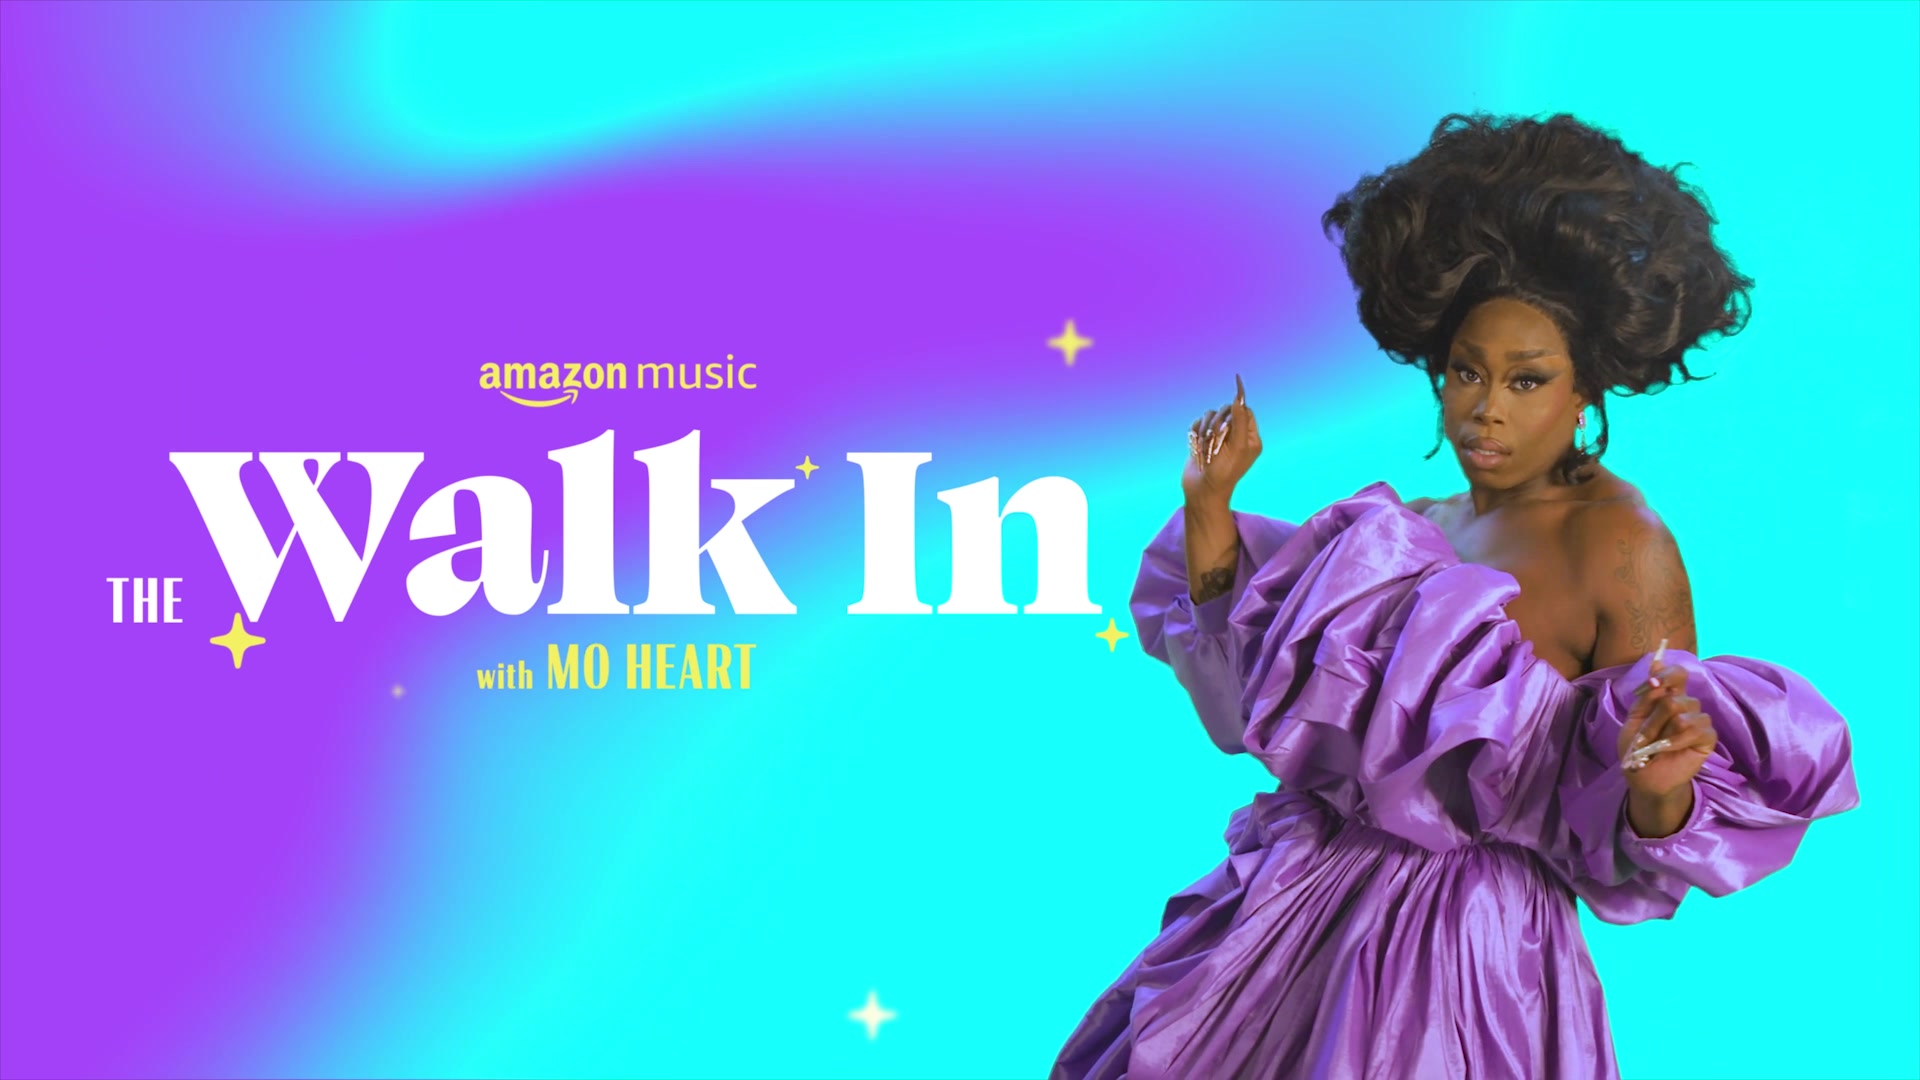 The Walk In with Monique Heart Show Artwork in white on light blue background